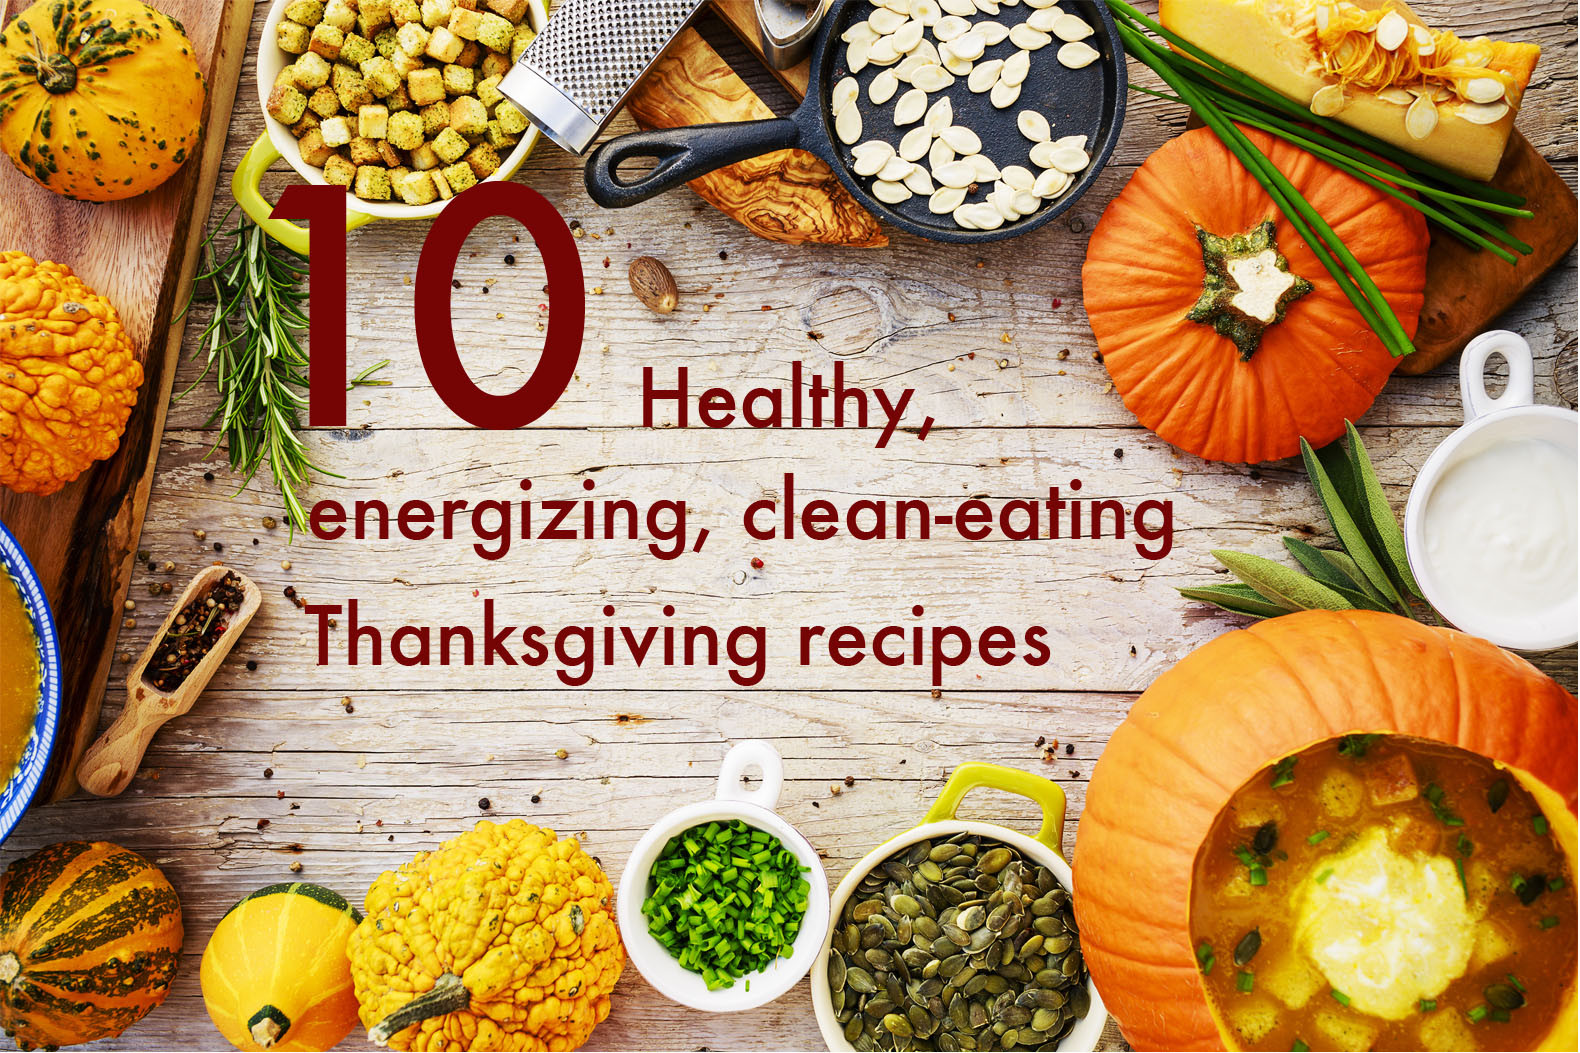 Clean Eating Blogs With Recipes
 10 Healthy energizing clean eating Thanksgiving recipes